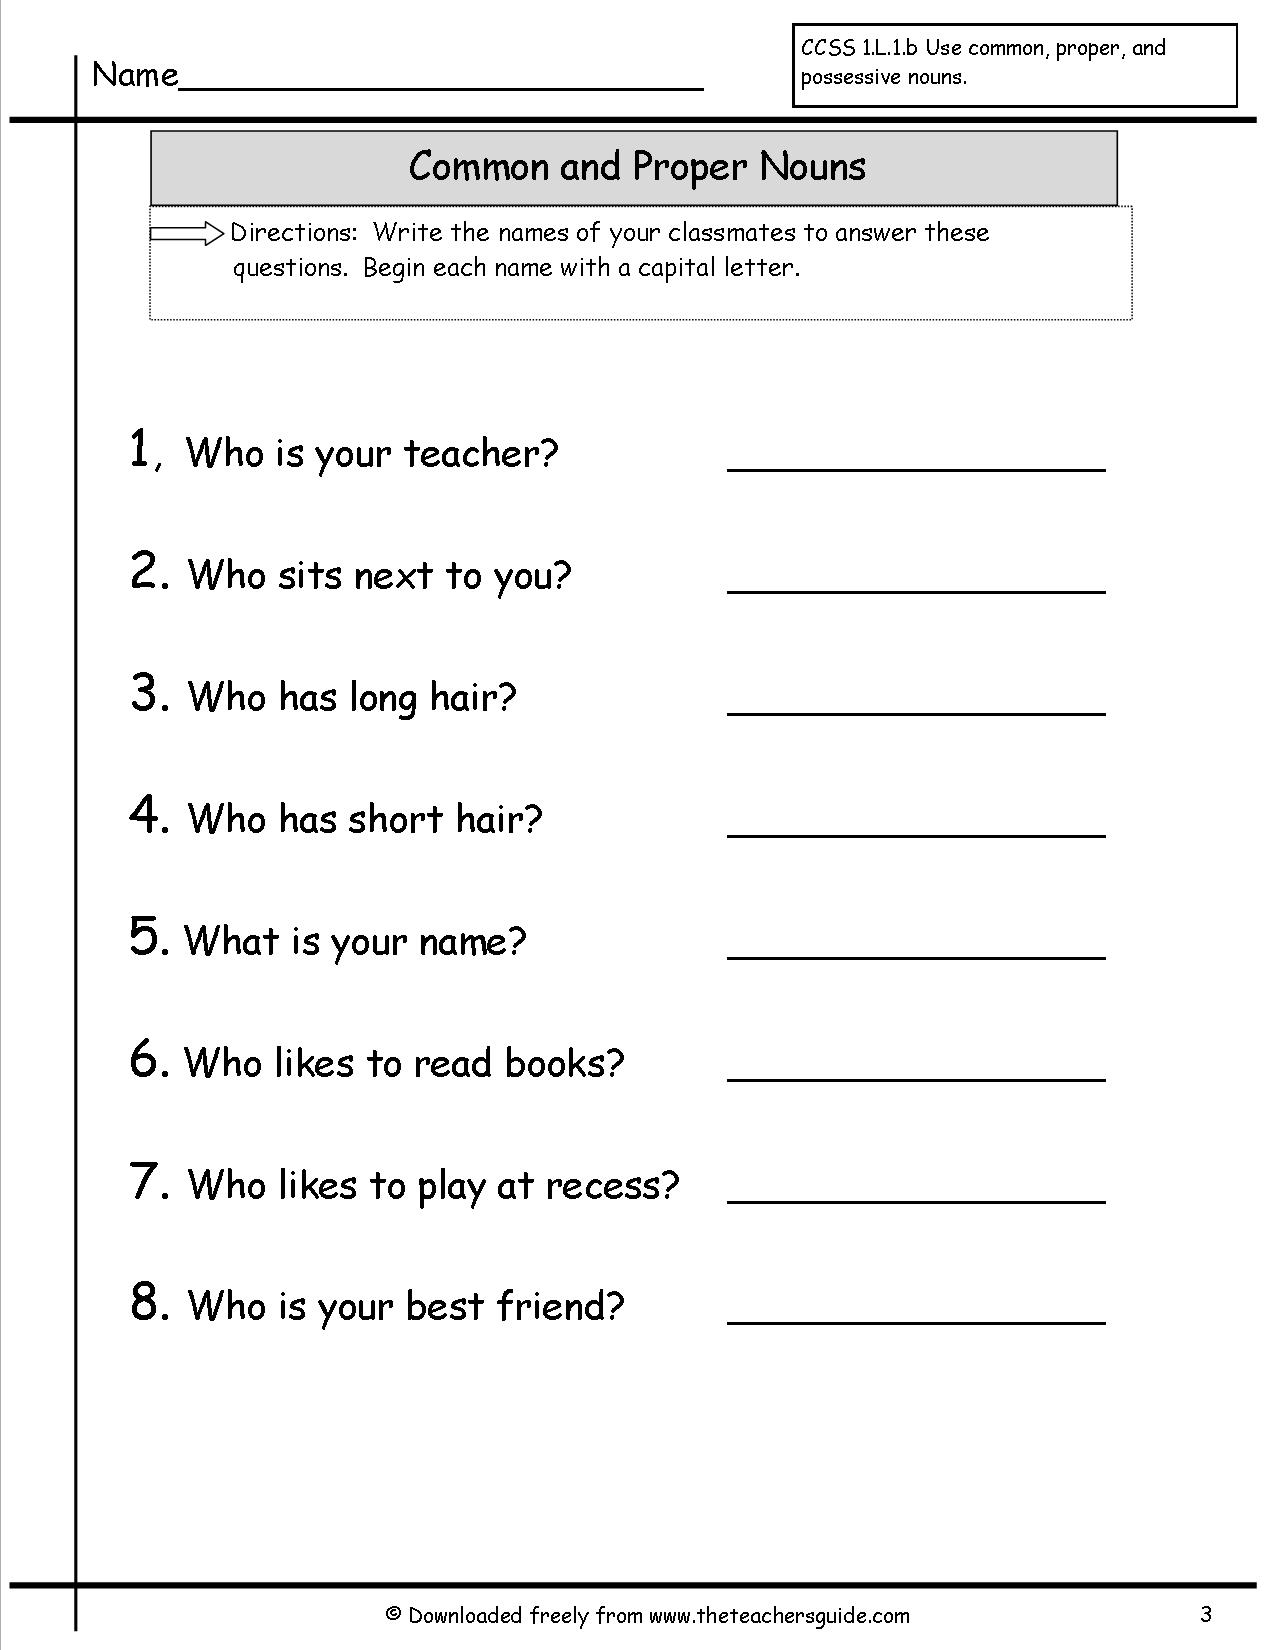 Common And Proper Nouns Worksheets For 3rd Grade Pdf